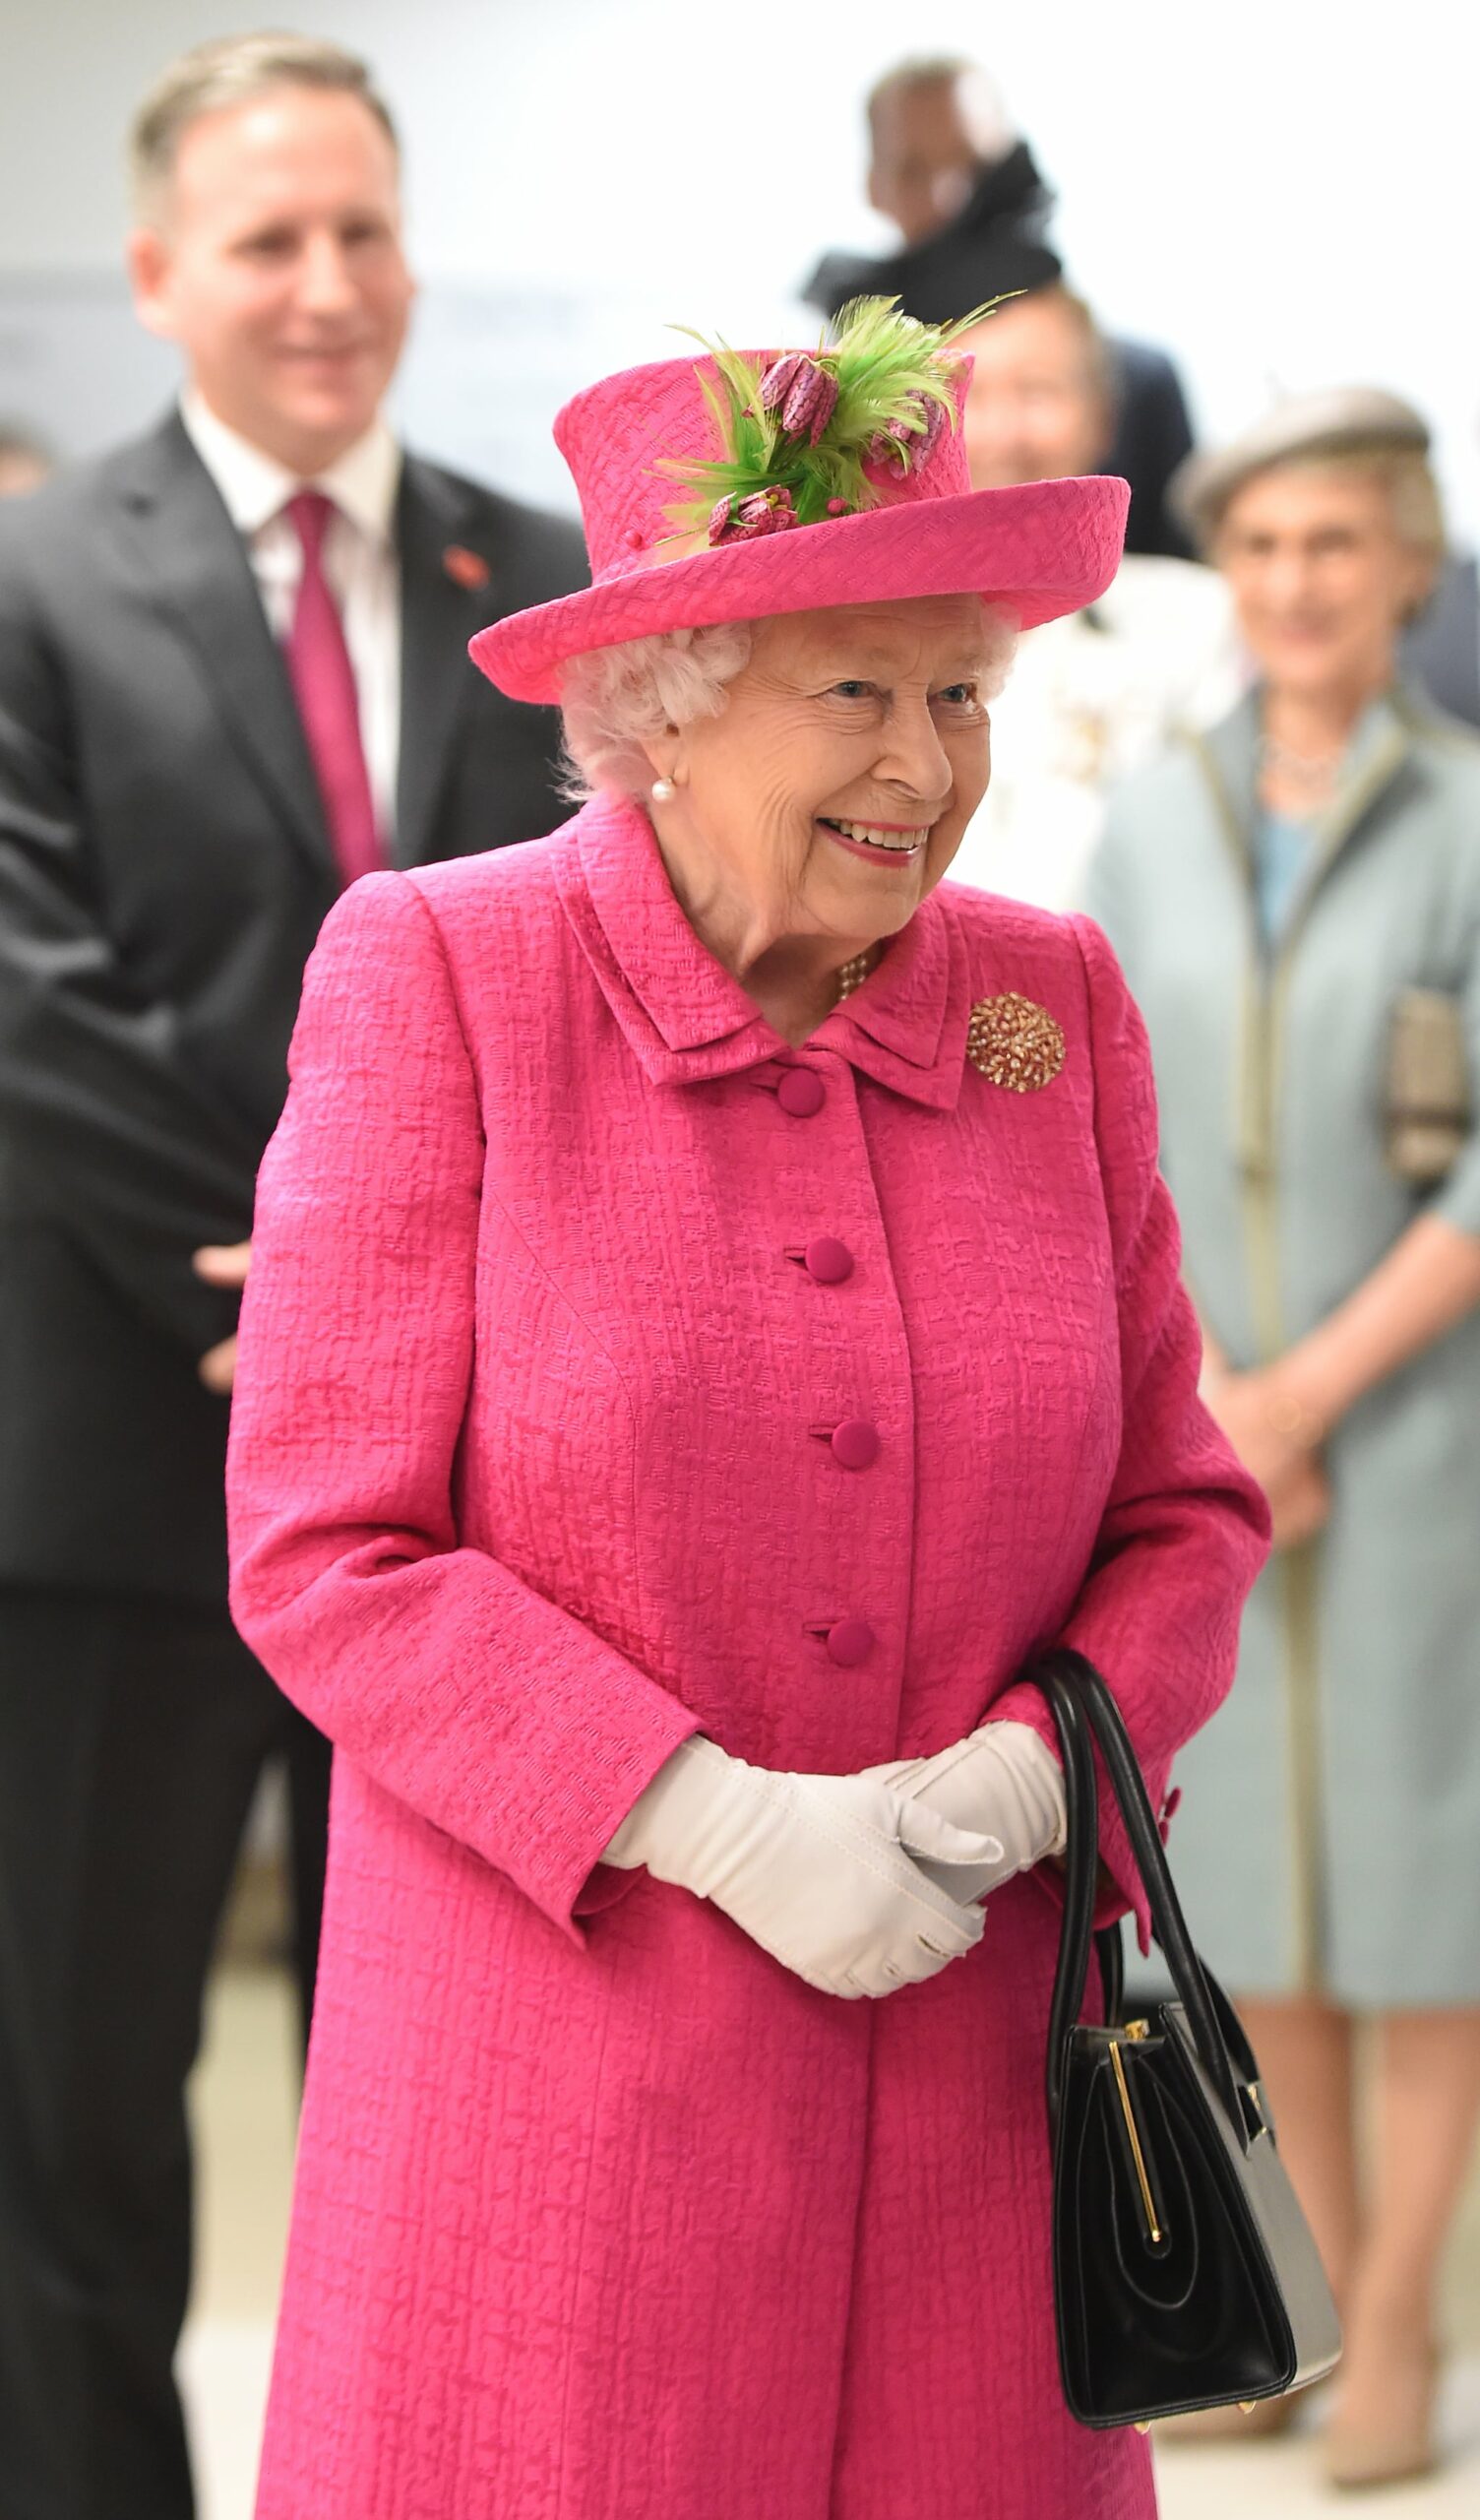 CAMBRIDGE, ENGLAND - JULY 09: Queen Elizabeth II during a visit to Royal Papworth Hospital on July 9, 2019 in Cambridge, England. (Photo by Joe Giddens - WPA Pool/Getty Images)